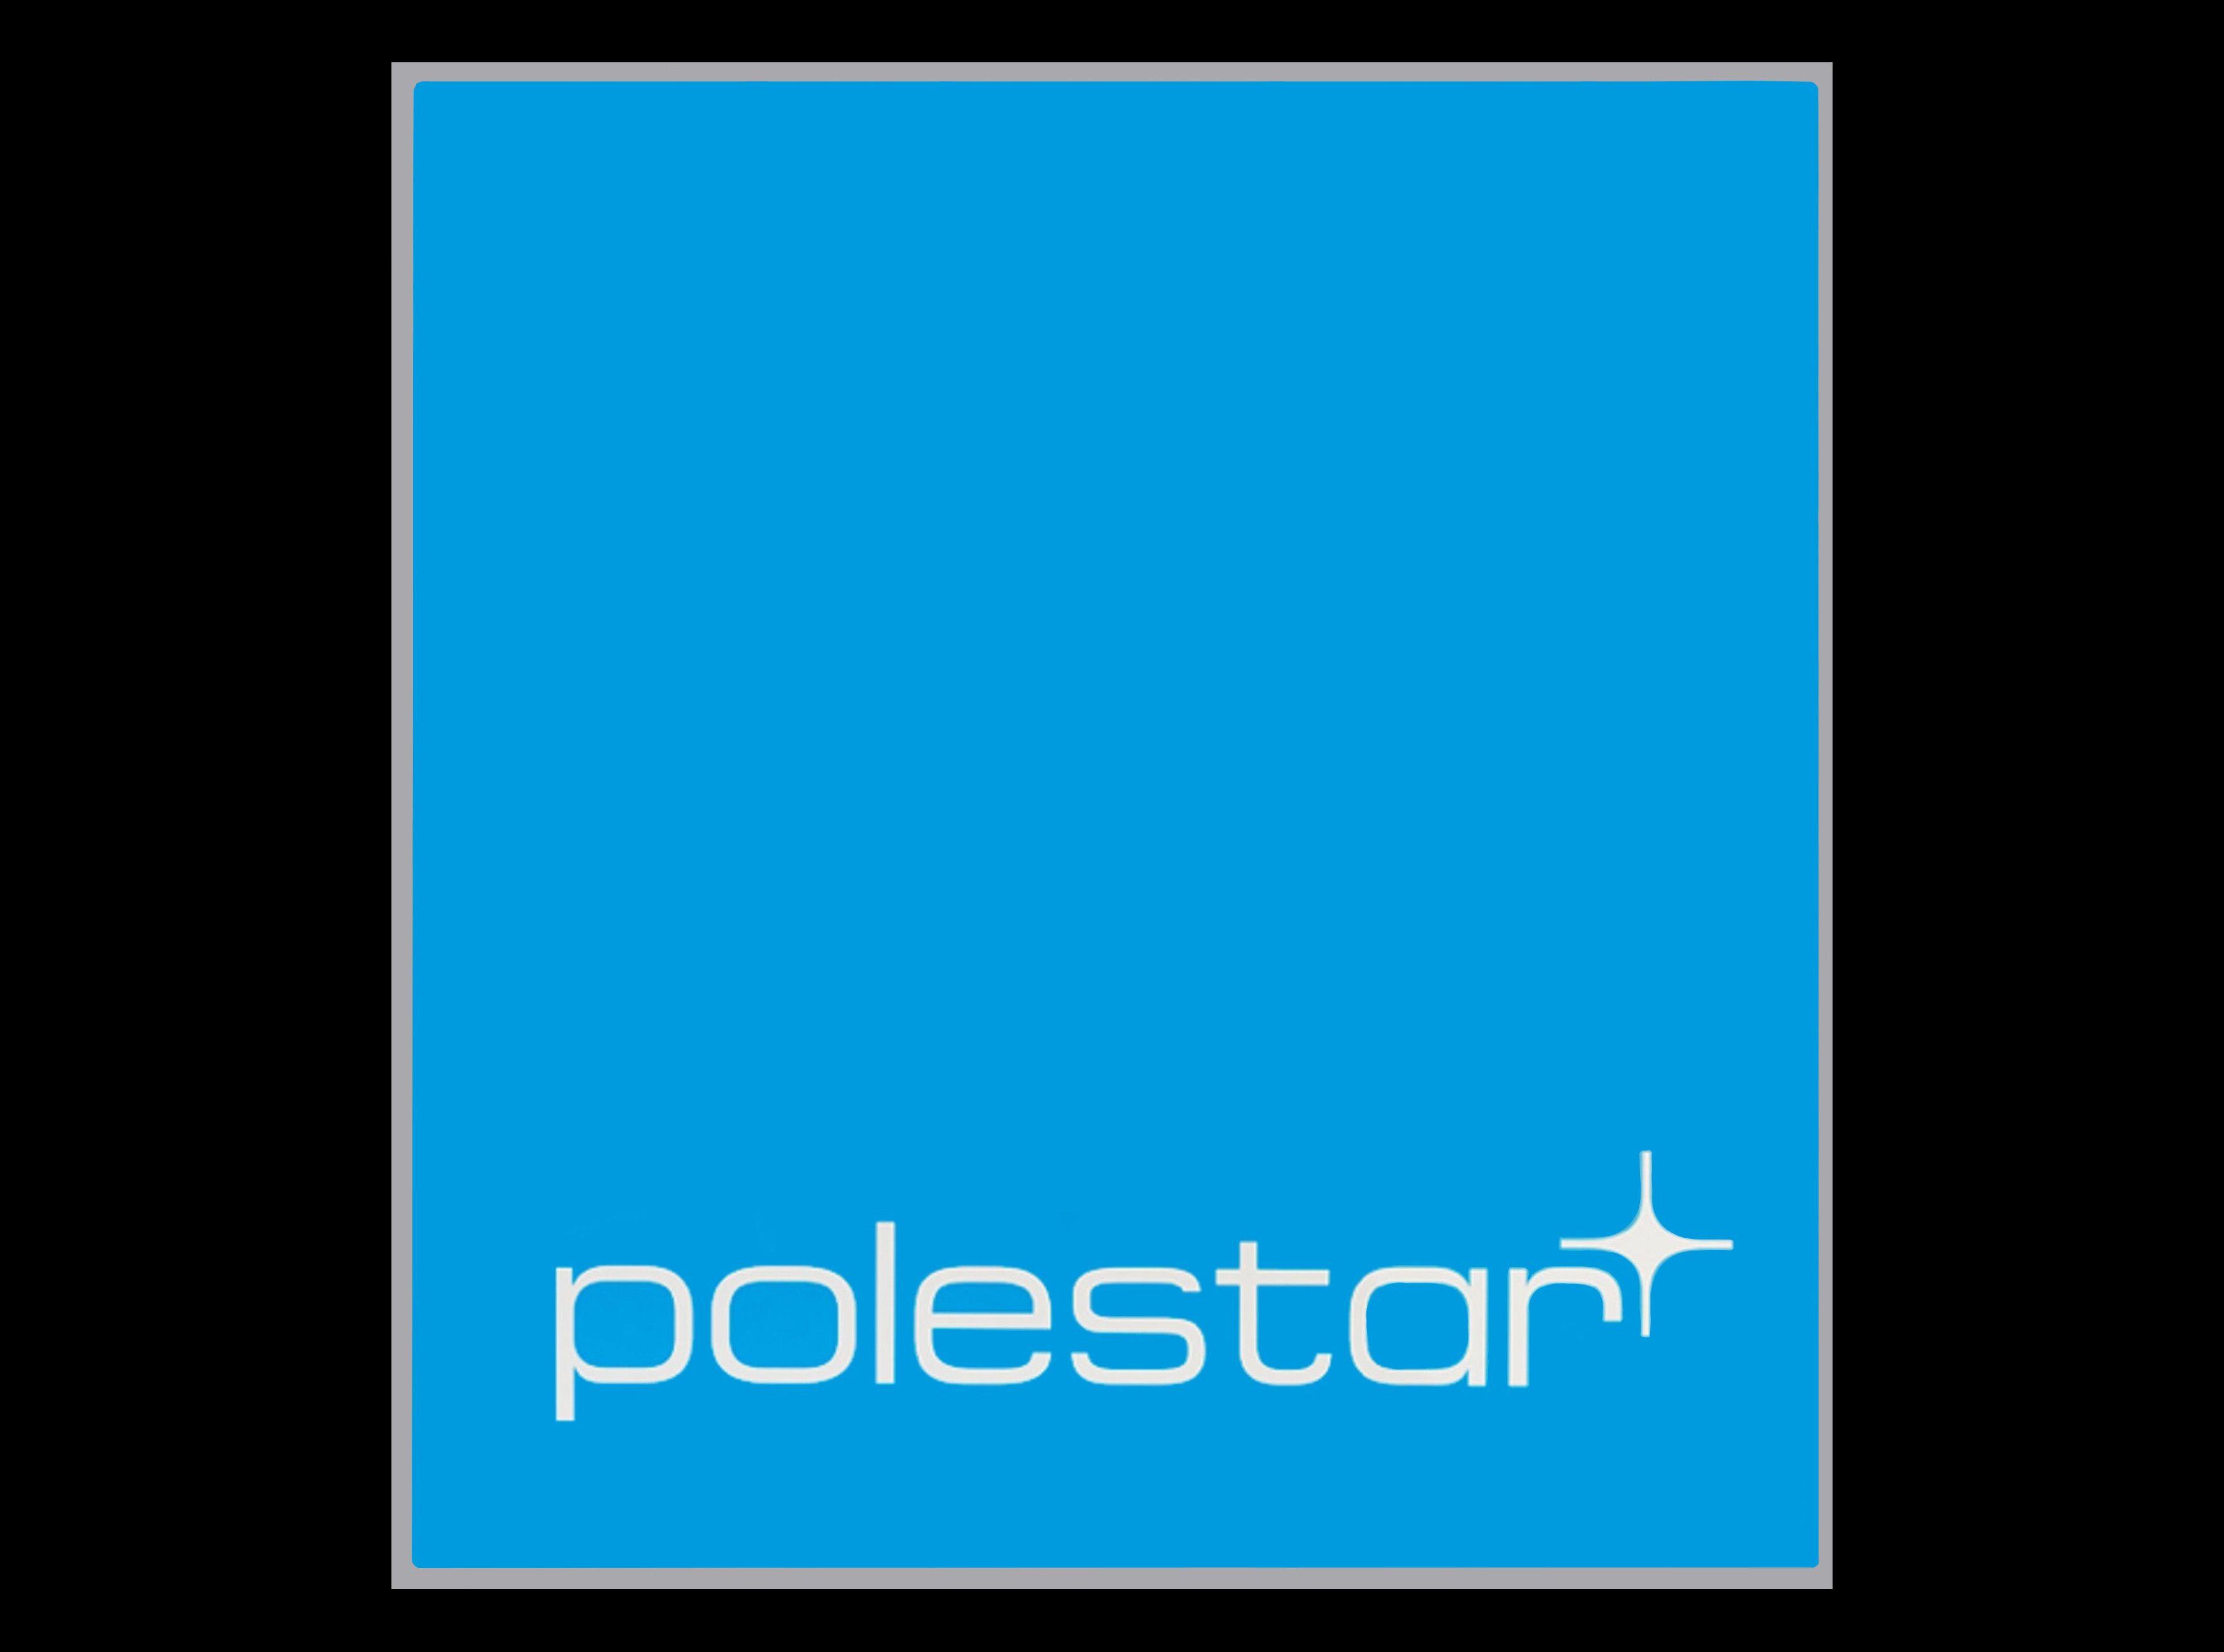 Lower Case Letters Blue and Silver Logo - Polestar Logo Meaning and History, latest models. World Cars Brands